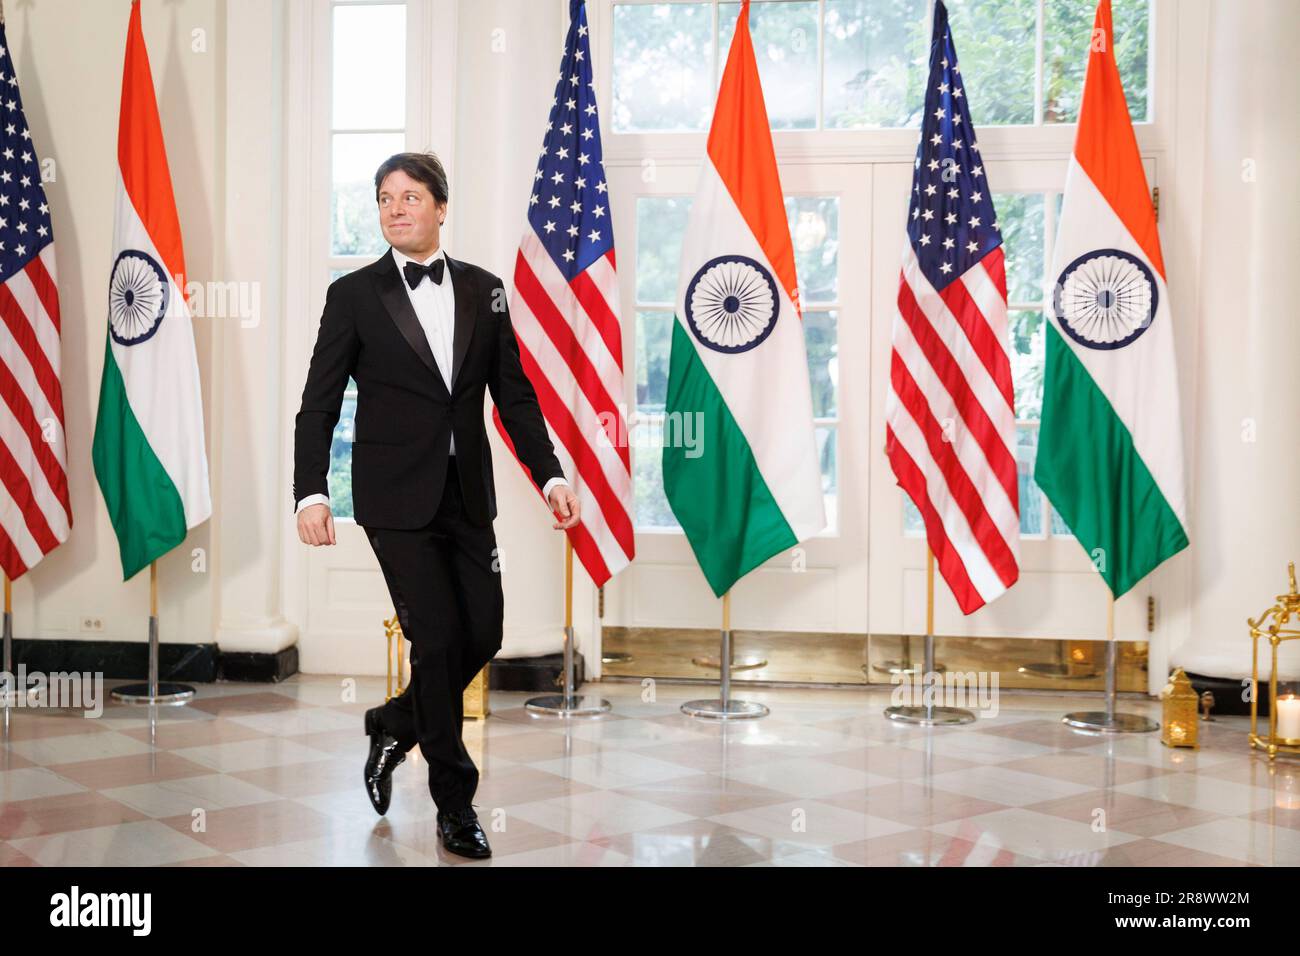 Washington, United States. 22nd June, 2023. Joshua Bell, violinist, arrives at a state dinner in honor of Indian Prime Minister Narendra Modi hosted by US President Joe Biden and First Lady Jill Biden at the White House in Washington, DC on Thursday, June 22, 2023. Biden and Modi announced a series of defense and commercial deals designed to improve military and economic ties between their nations during a state visit at the White House today. Photo by Ting Shen/UPI Credit: UPI/Alamy Live News Stock Photo